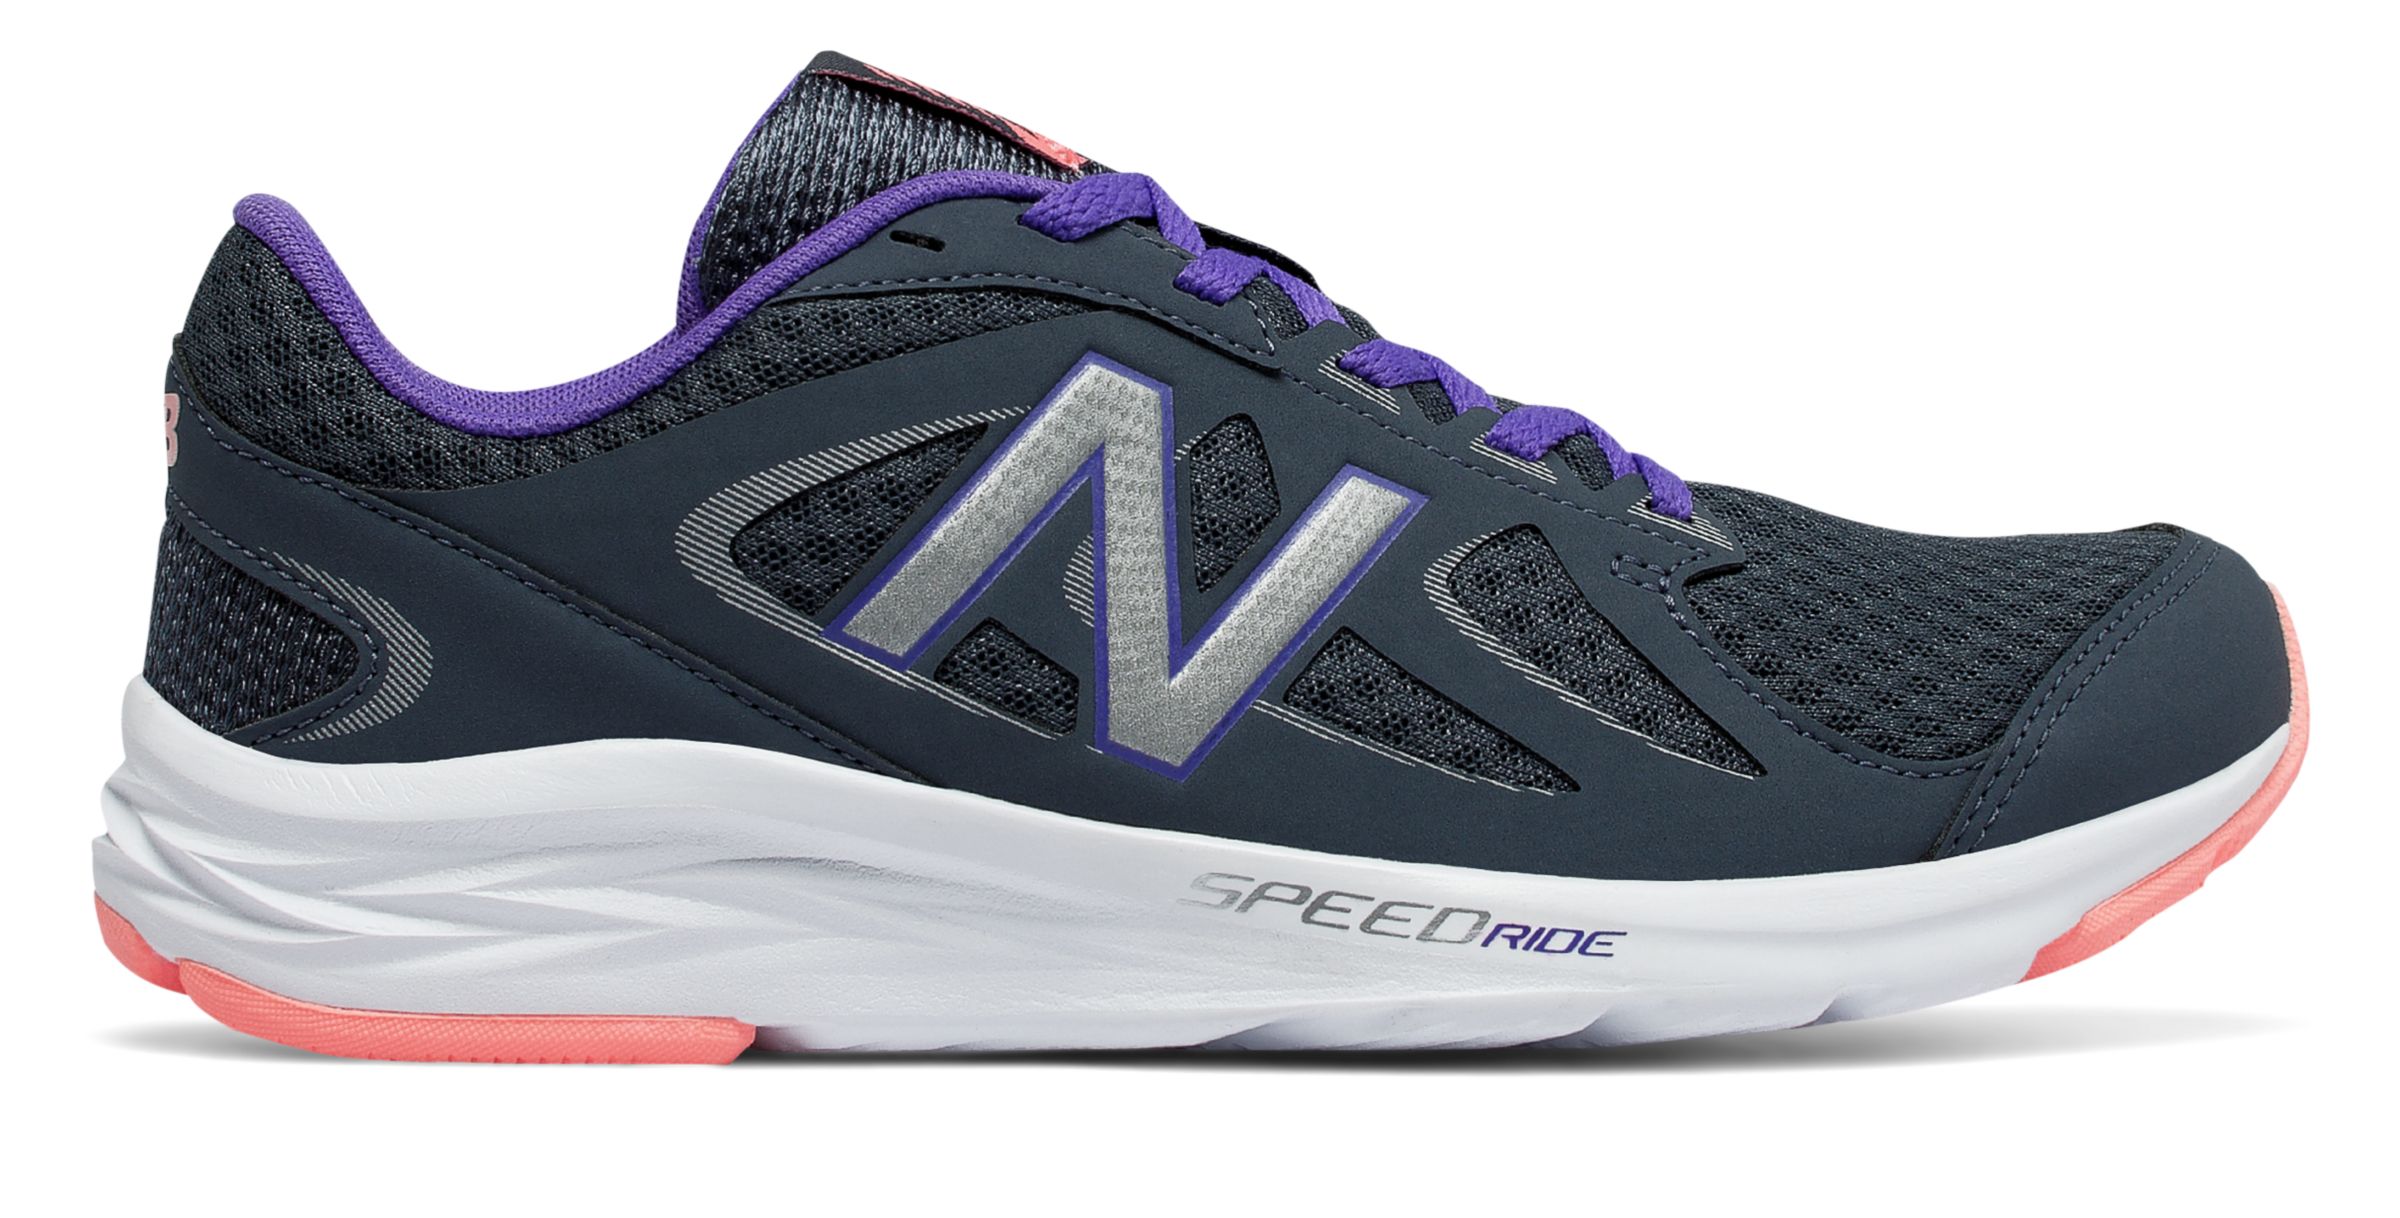 New Balance W490-V4 on Sale - Discounts Up to 20% Off on W490CA4 at Joe's New  Balance Outlet